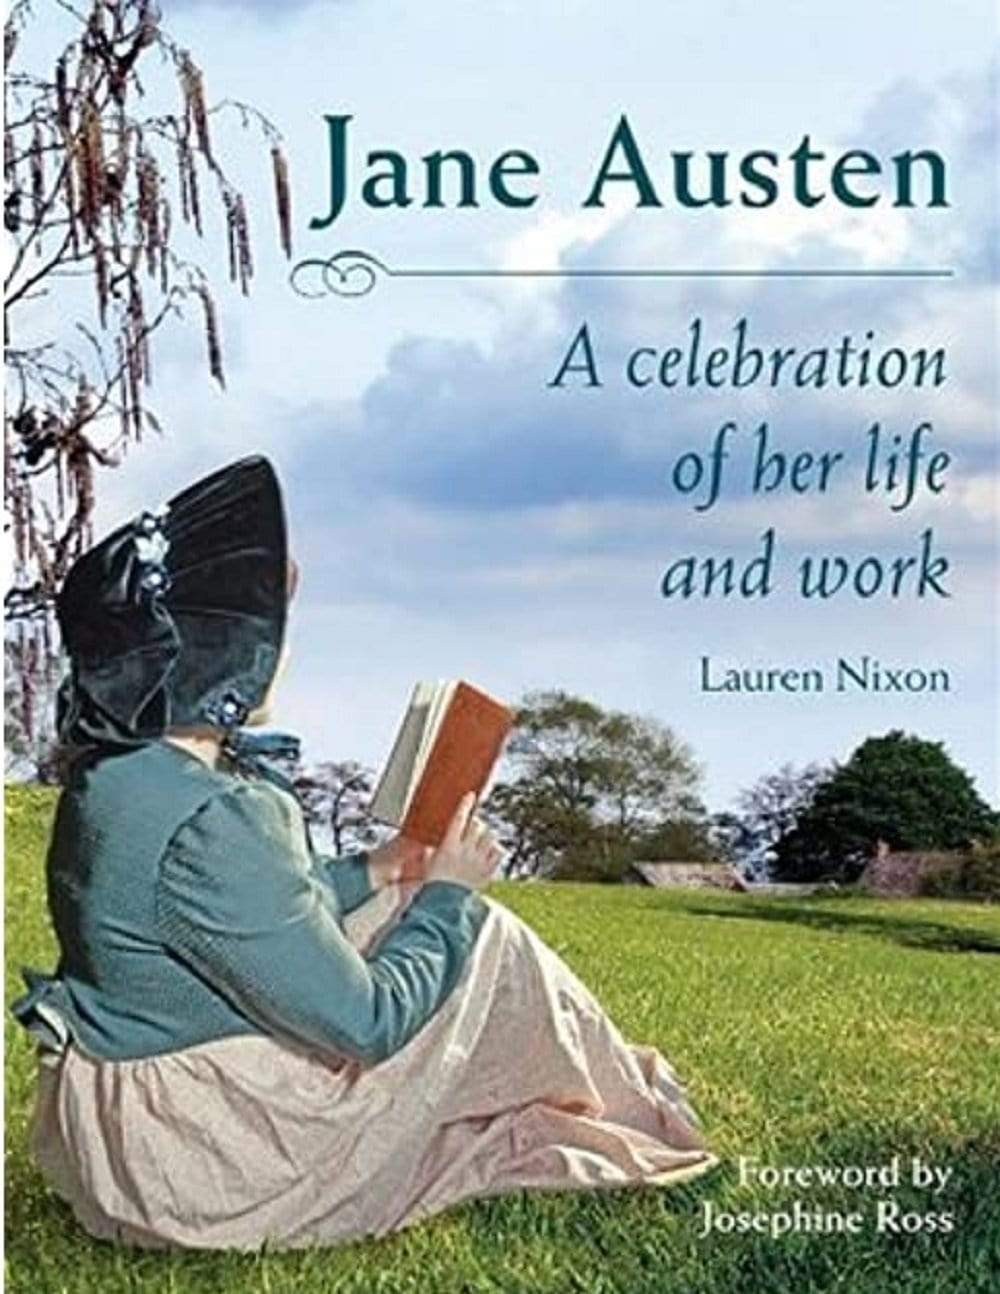 JANE AUSTEN : A CELEBRATION OF HER LIFE AND WORK